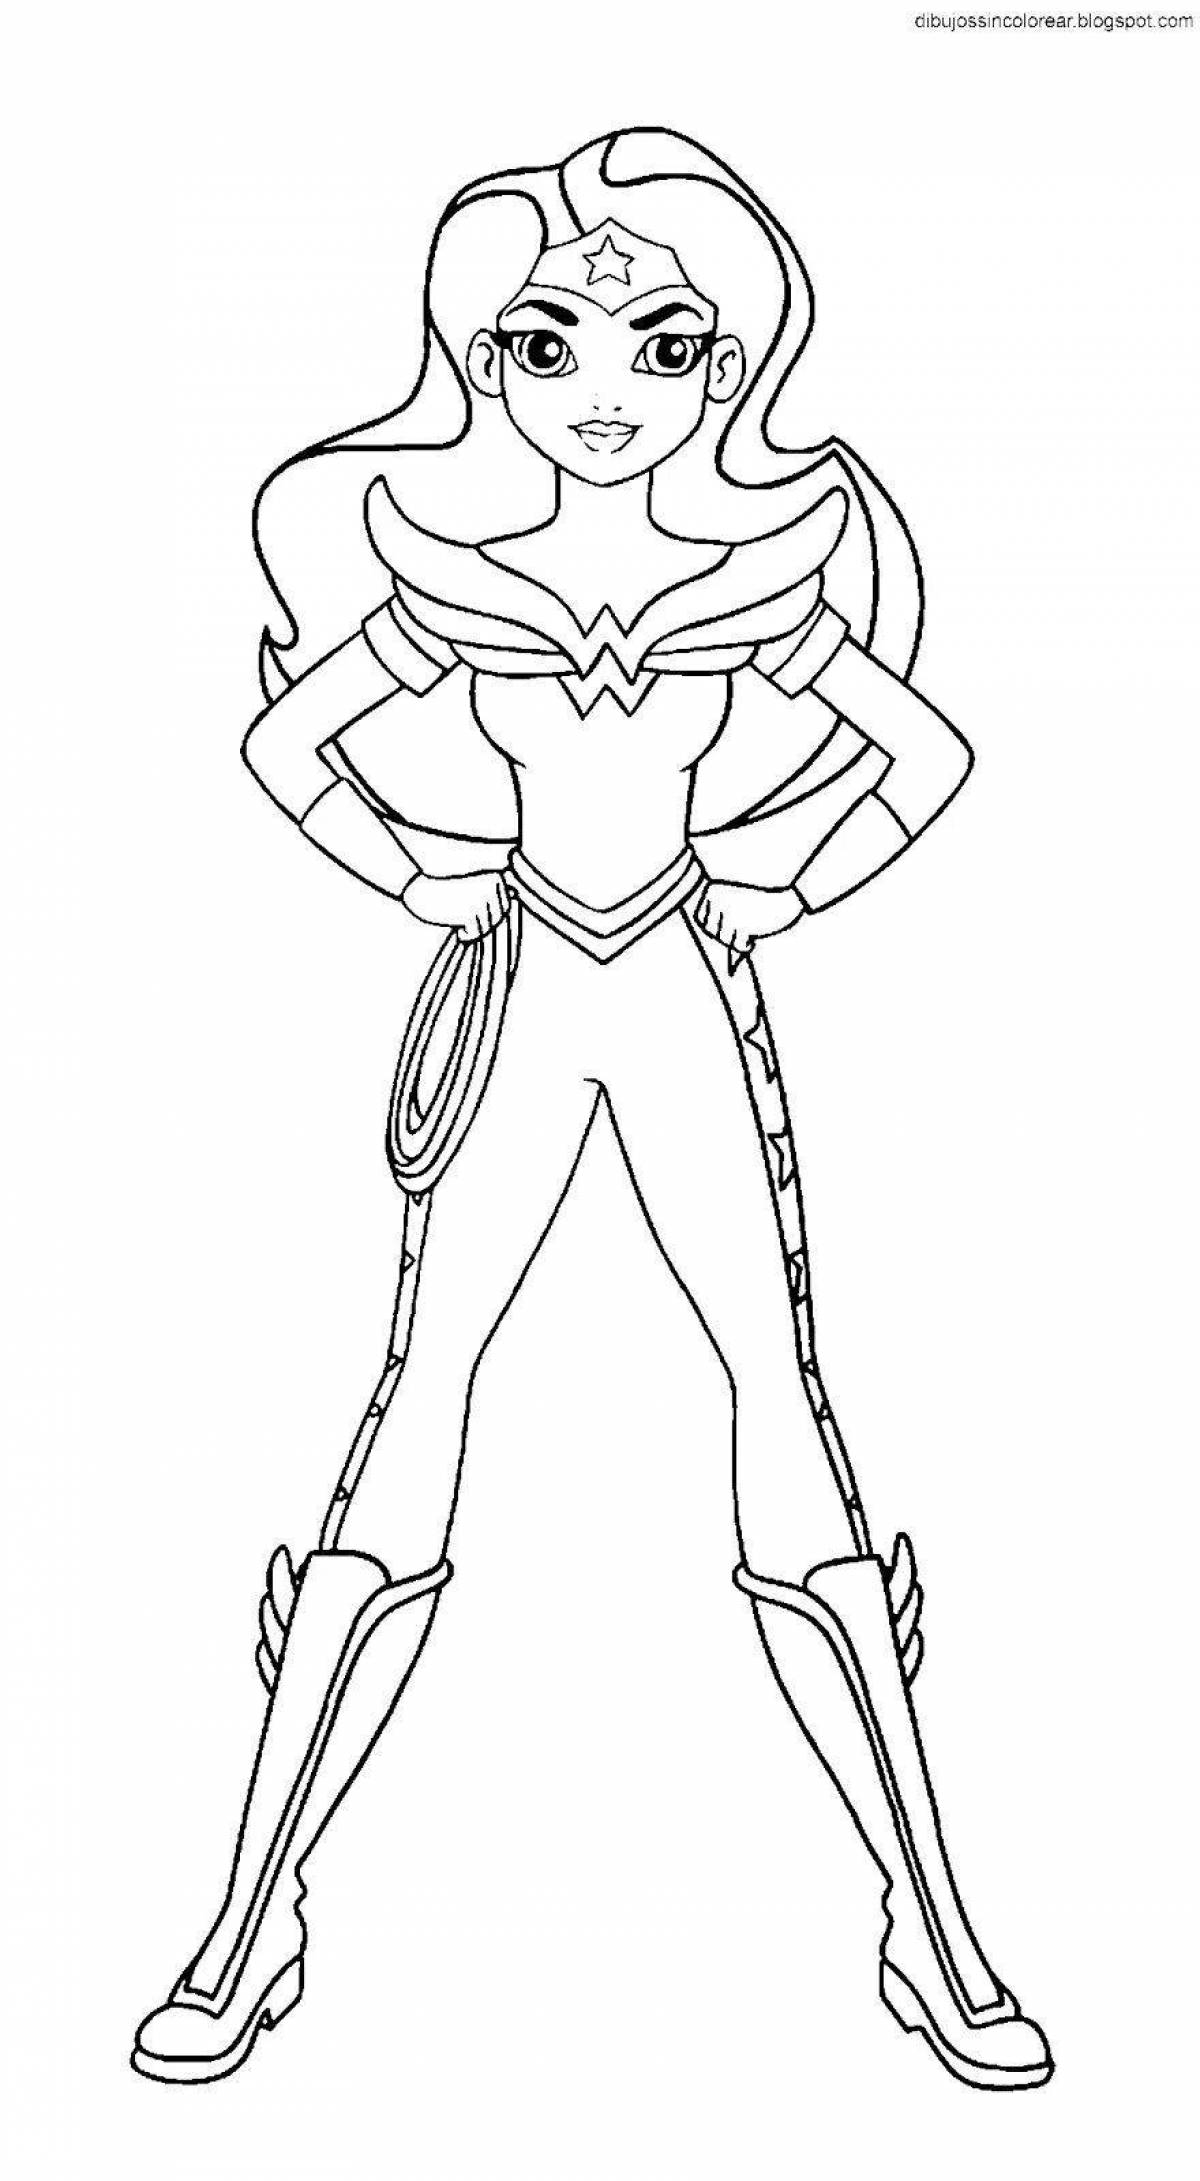 Amazing coloring pages for superhero girls